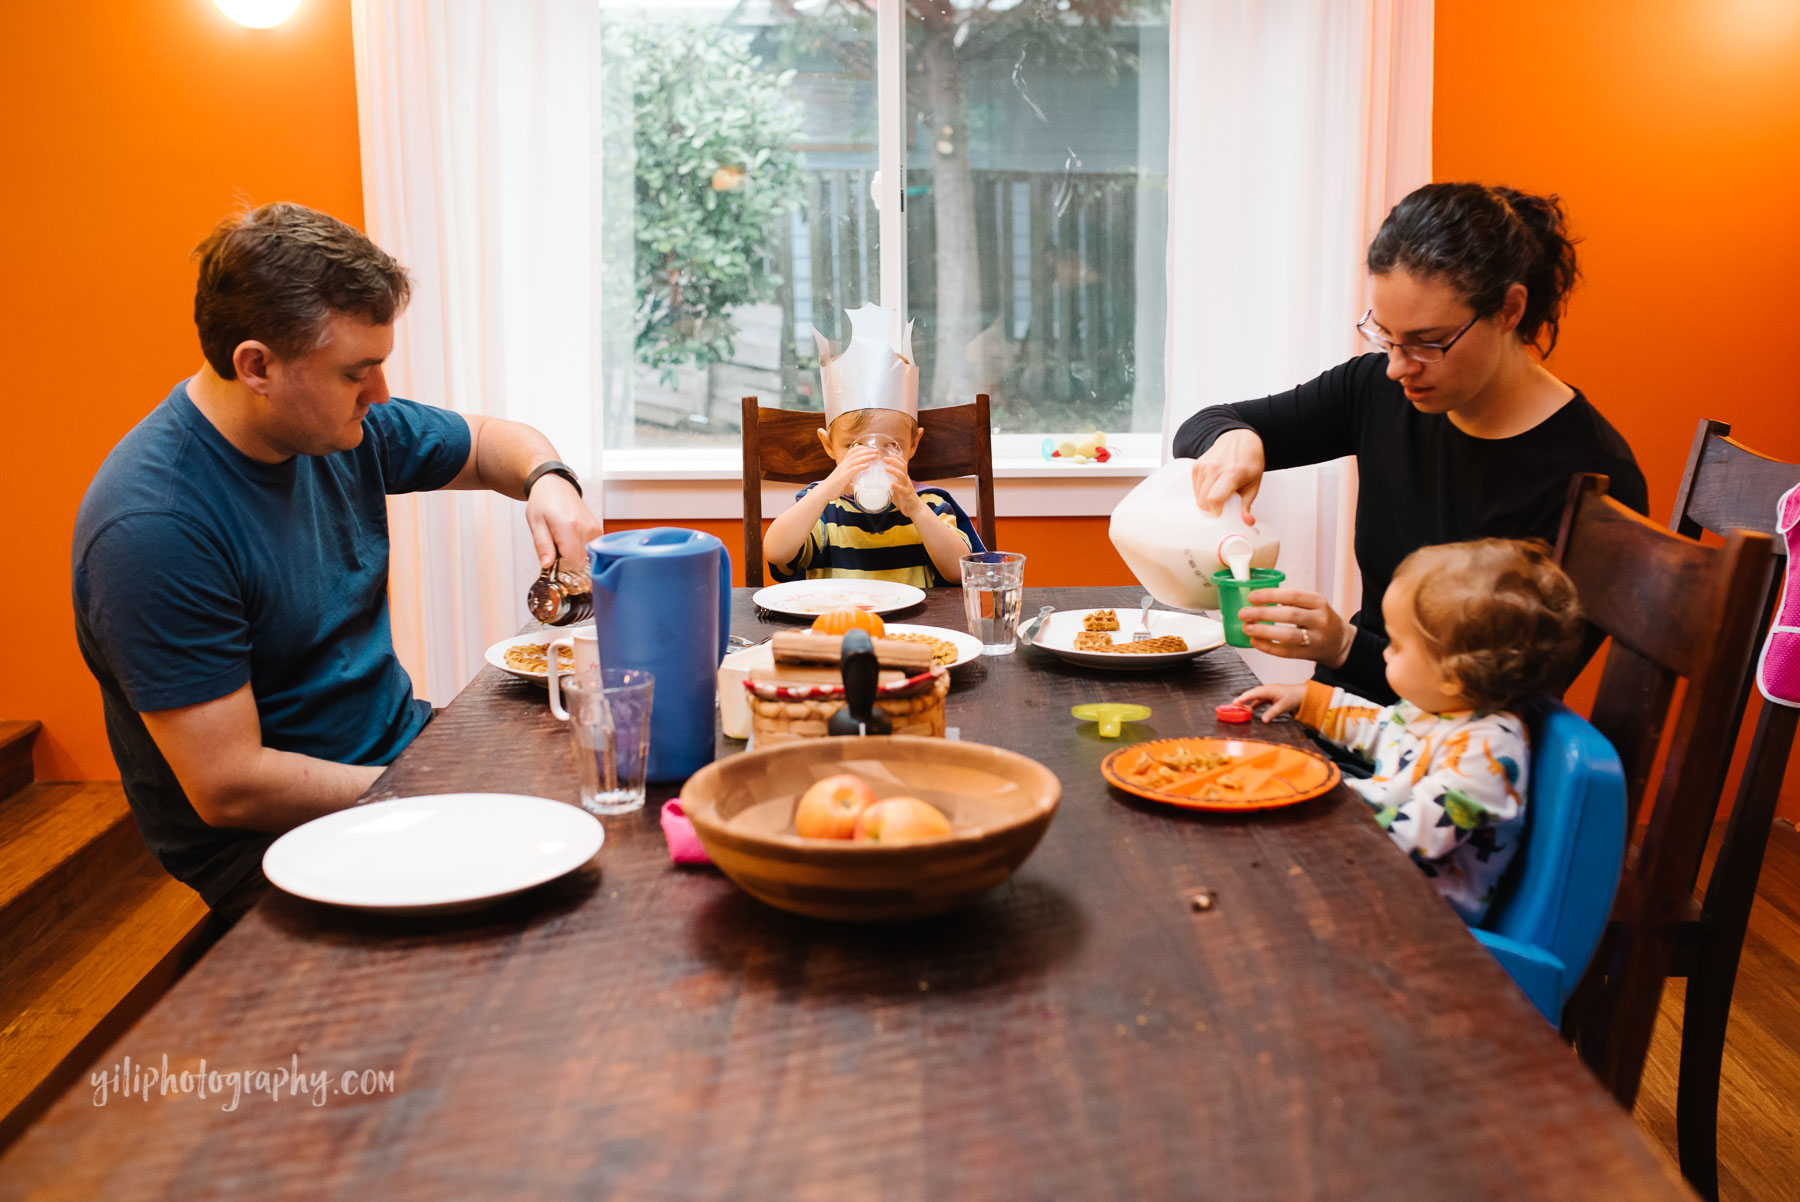 Family of four eating breakfast together at dining table